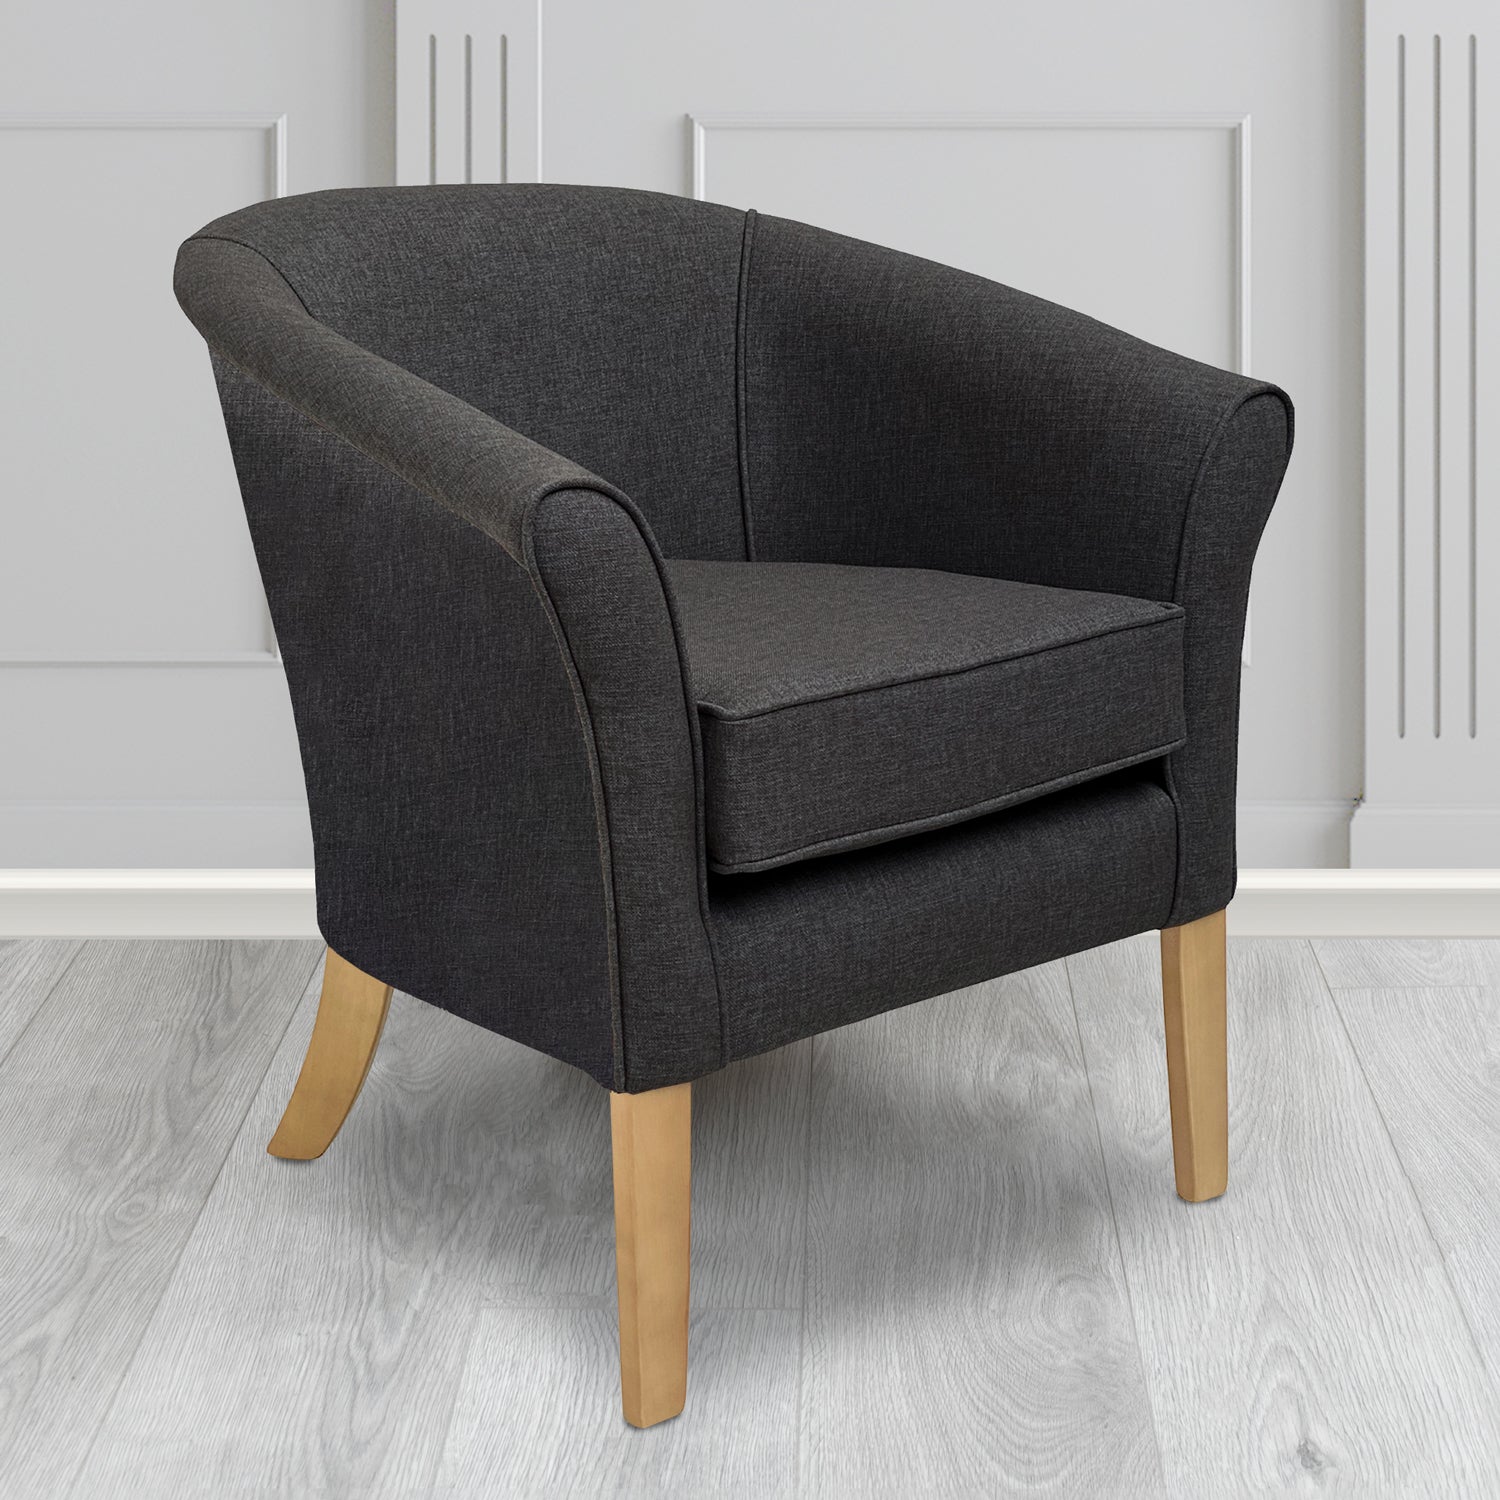 Aspen Tub Chair in Marna 903 Charcoal Crib 5 Fabric - Antimicrobial, Stain Resistant & Waterproof - The Tub Chair Shop